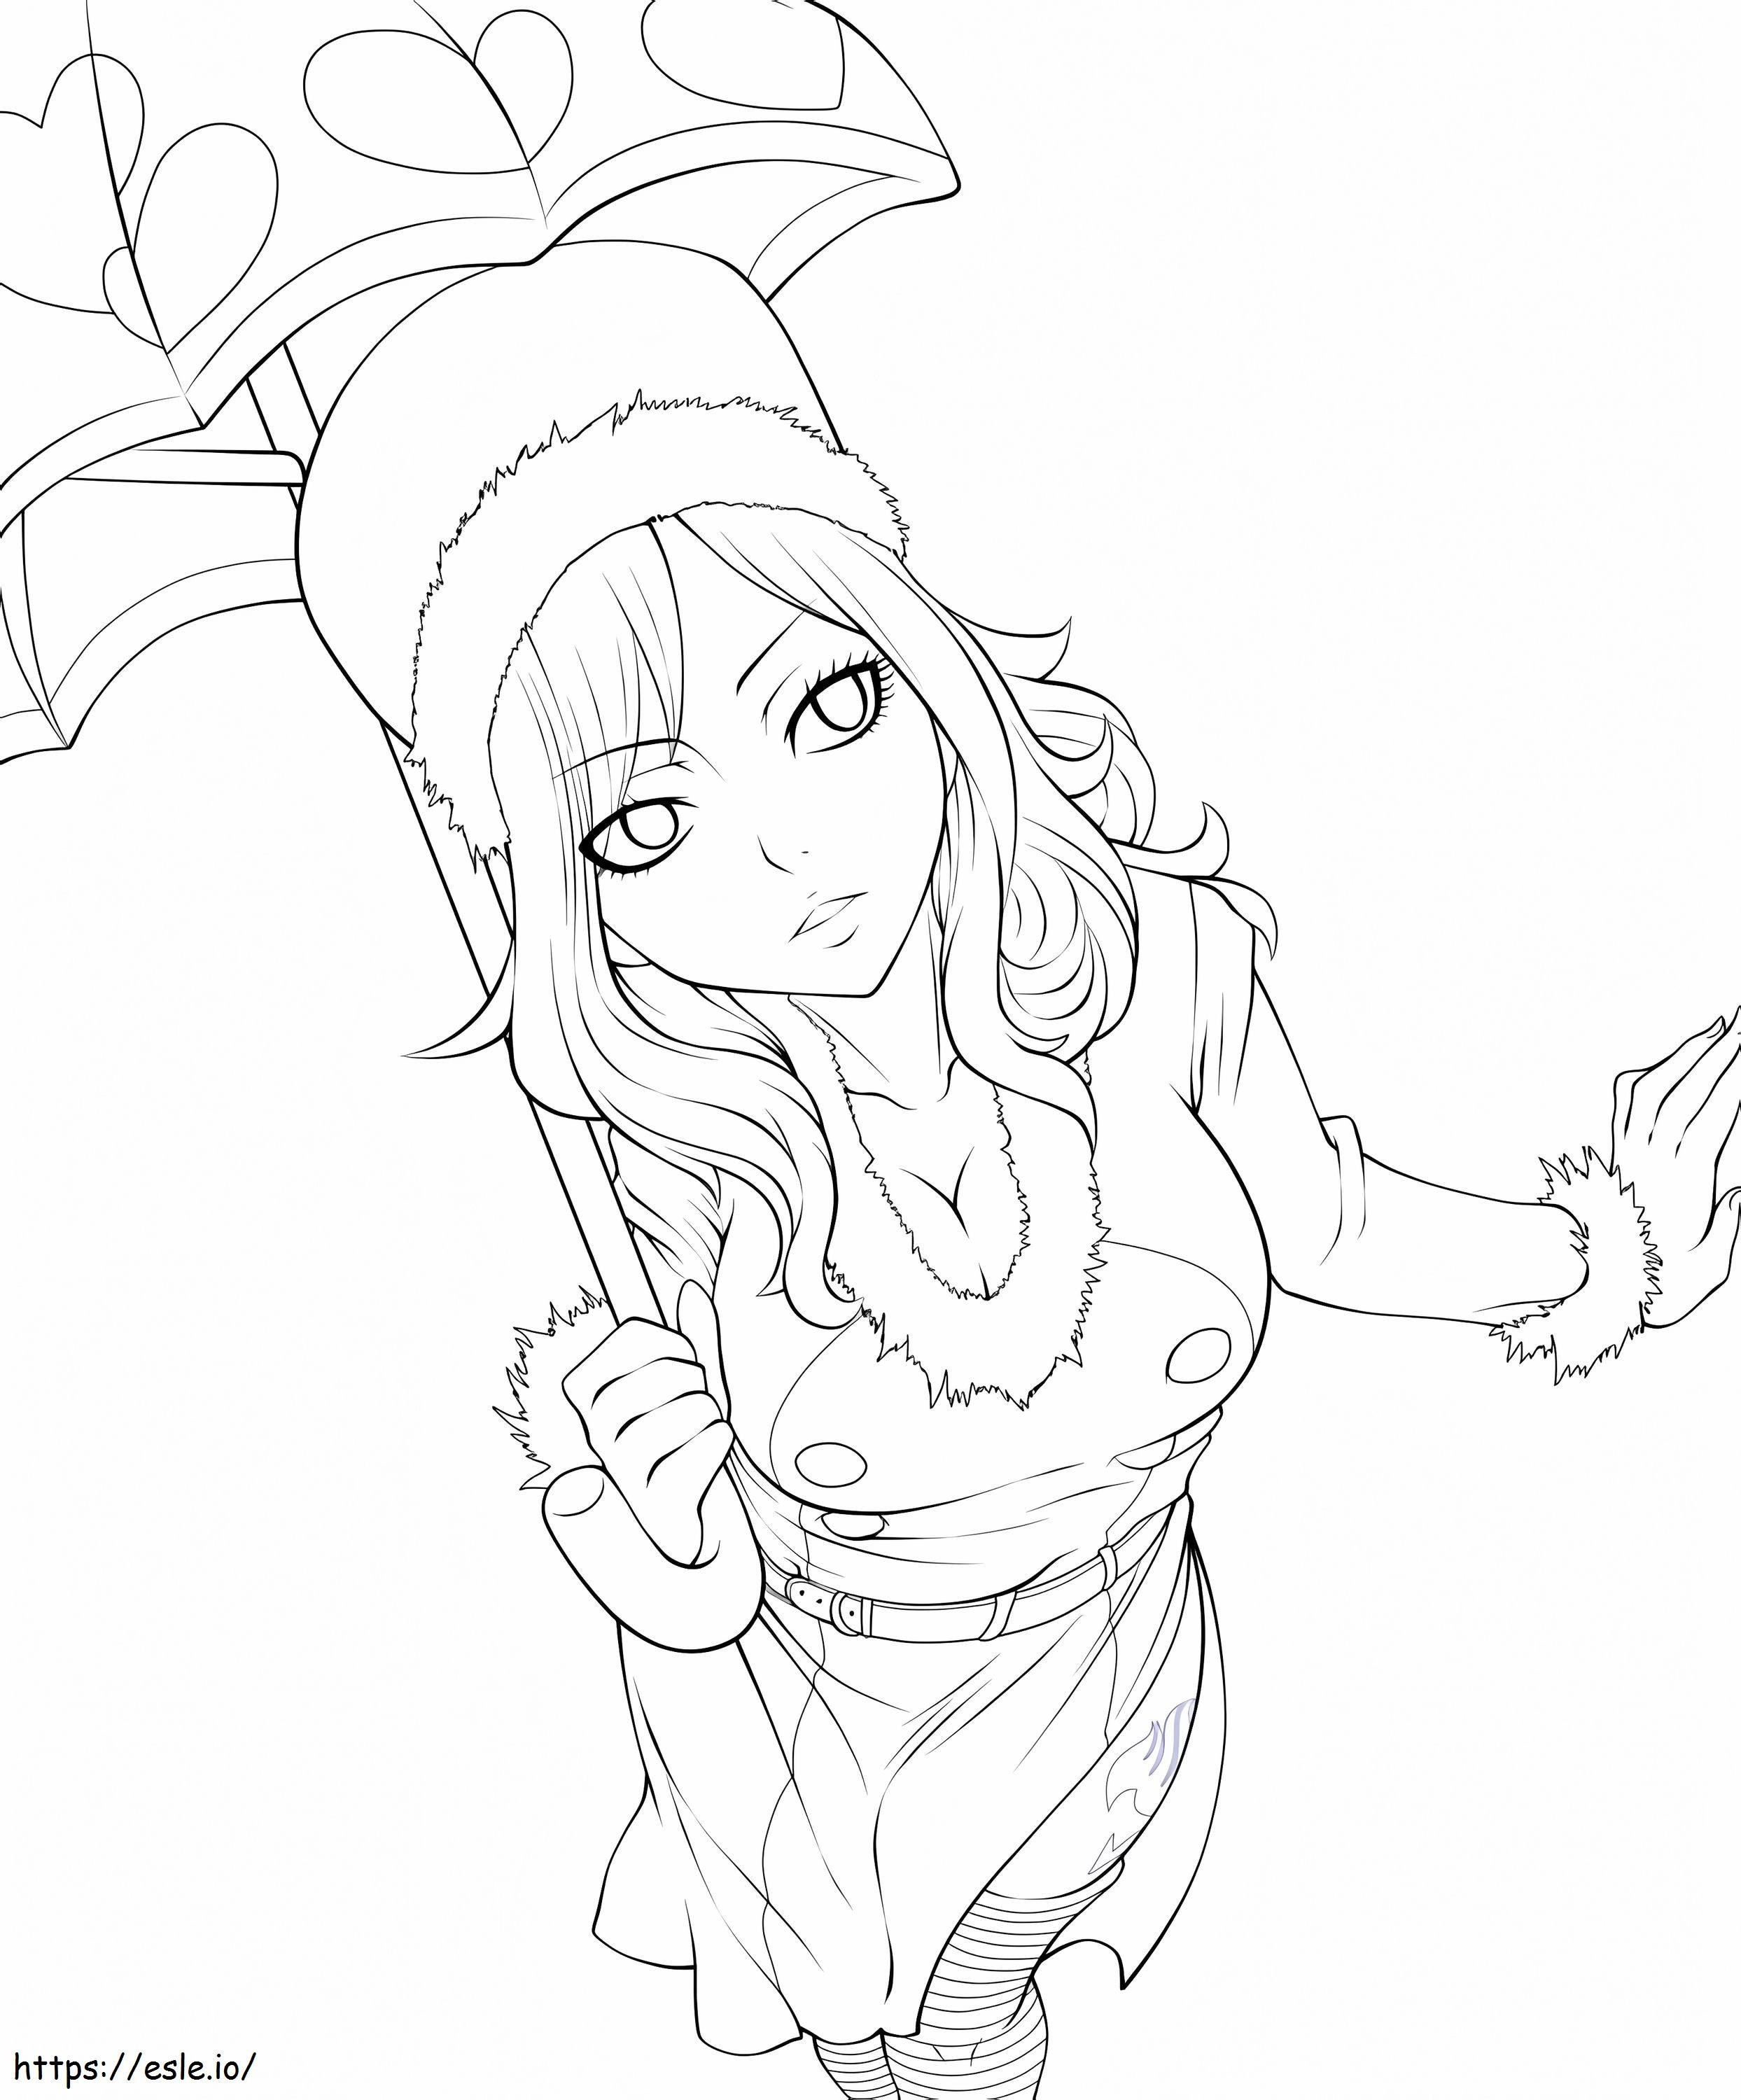 Juvia Loxar Fairy Tail coloring page